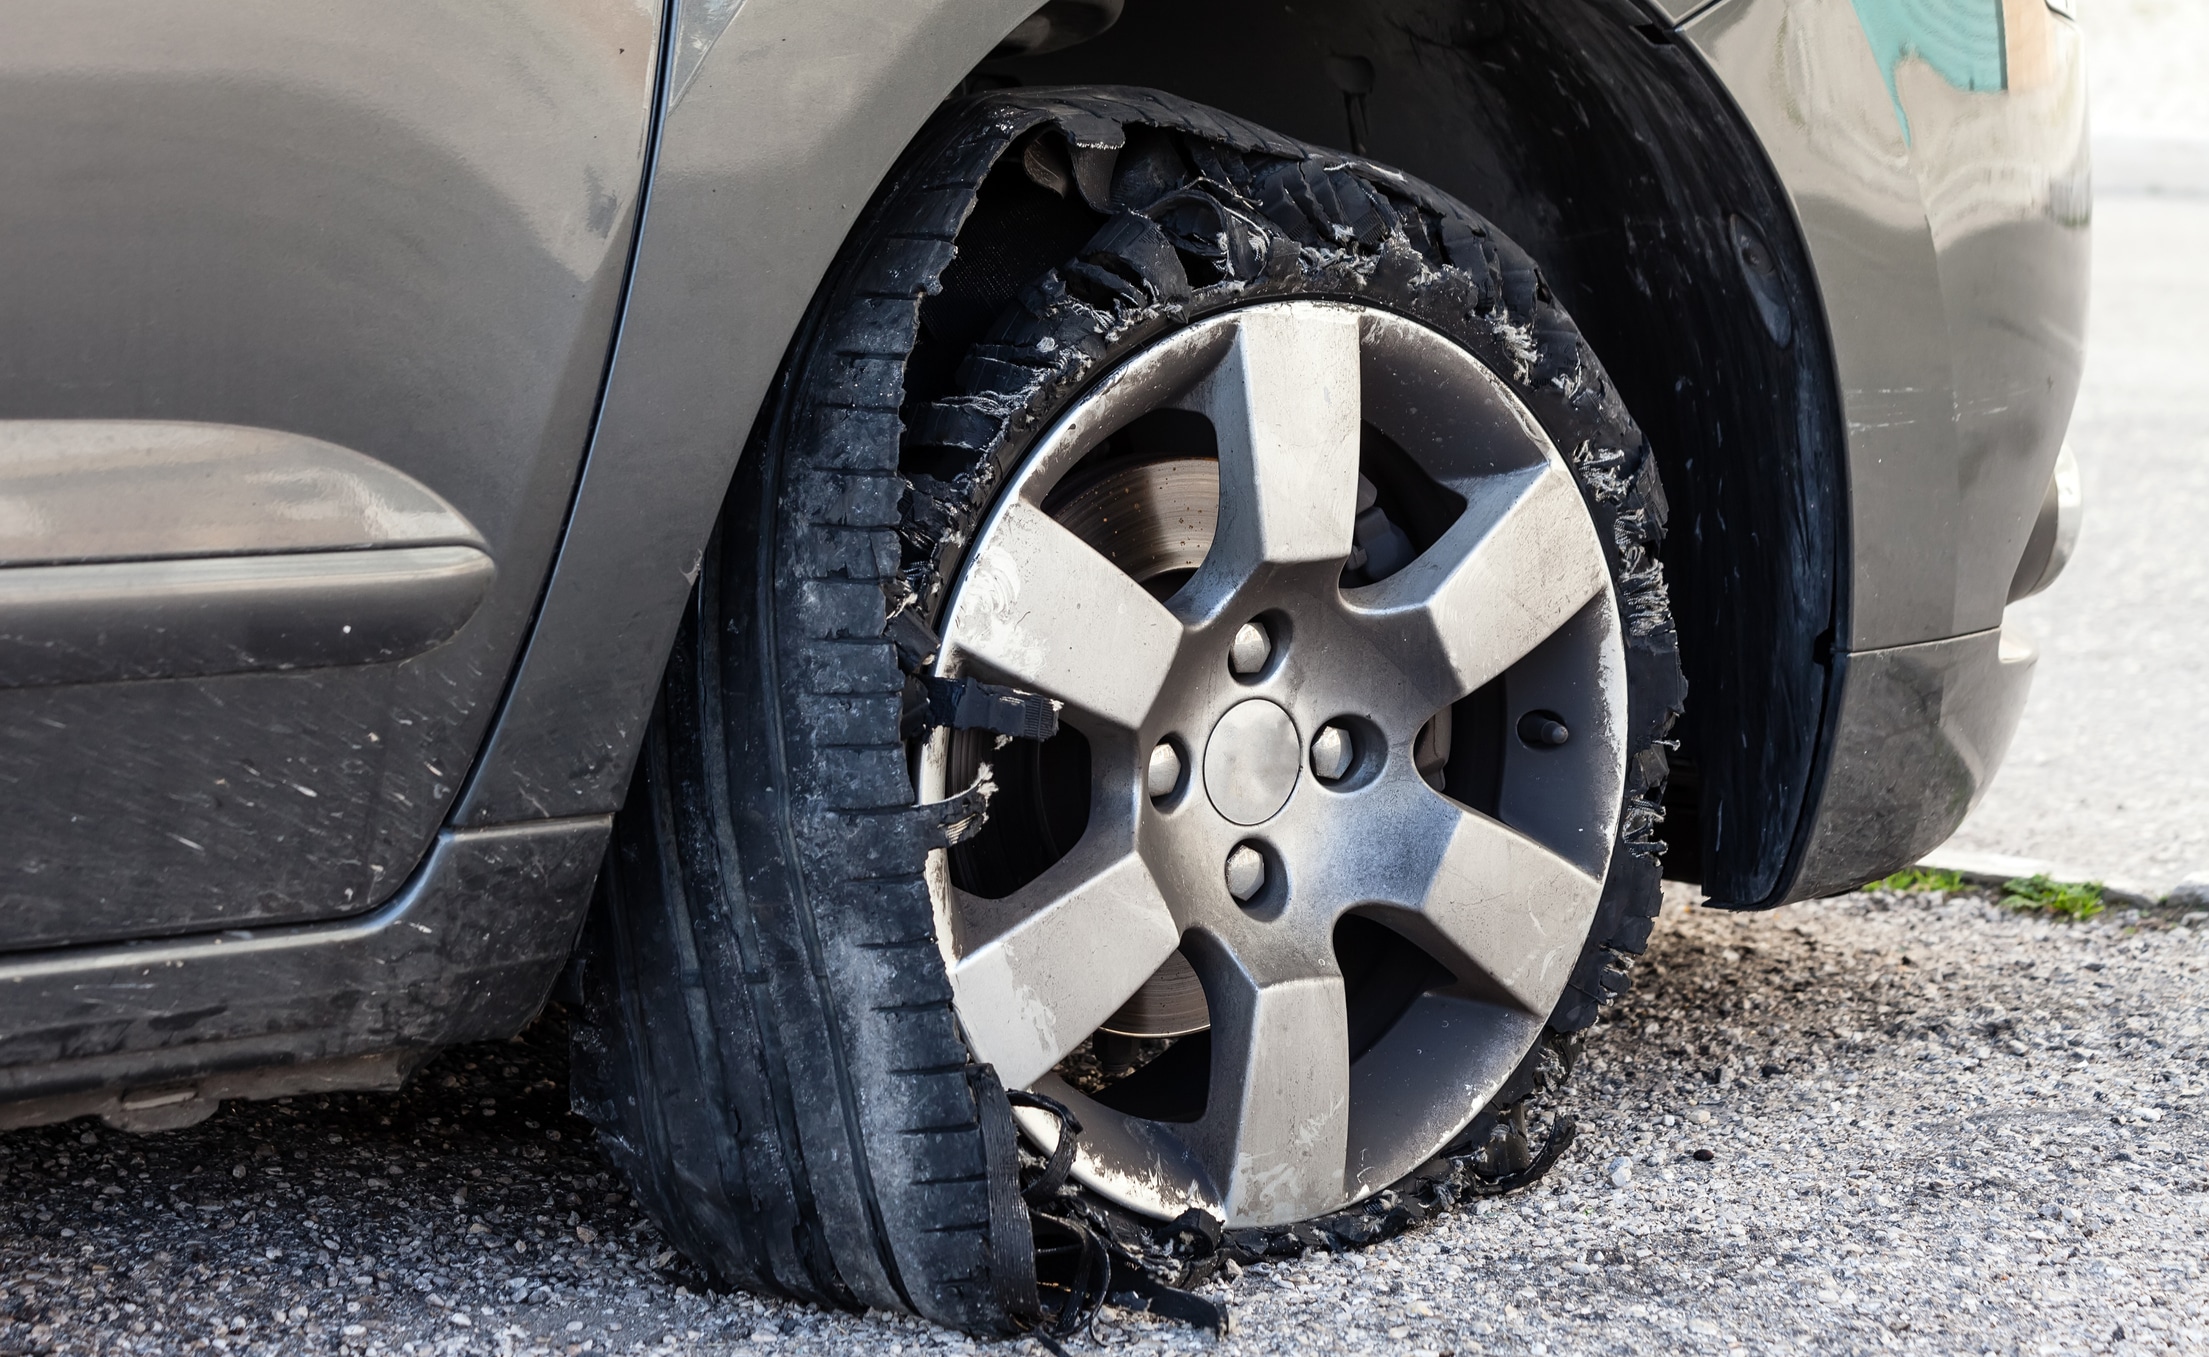 7 Steps to Protect Your Car From Potholes - Safer America